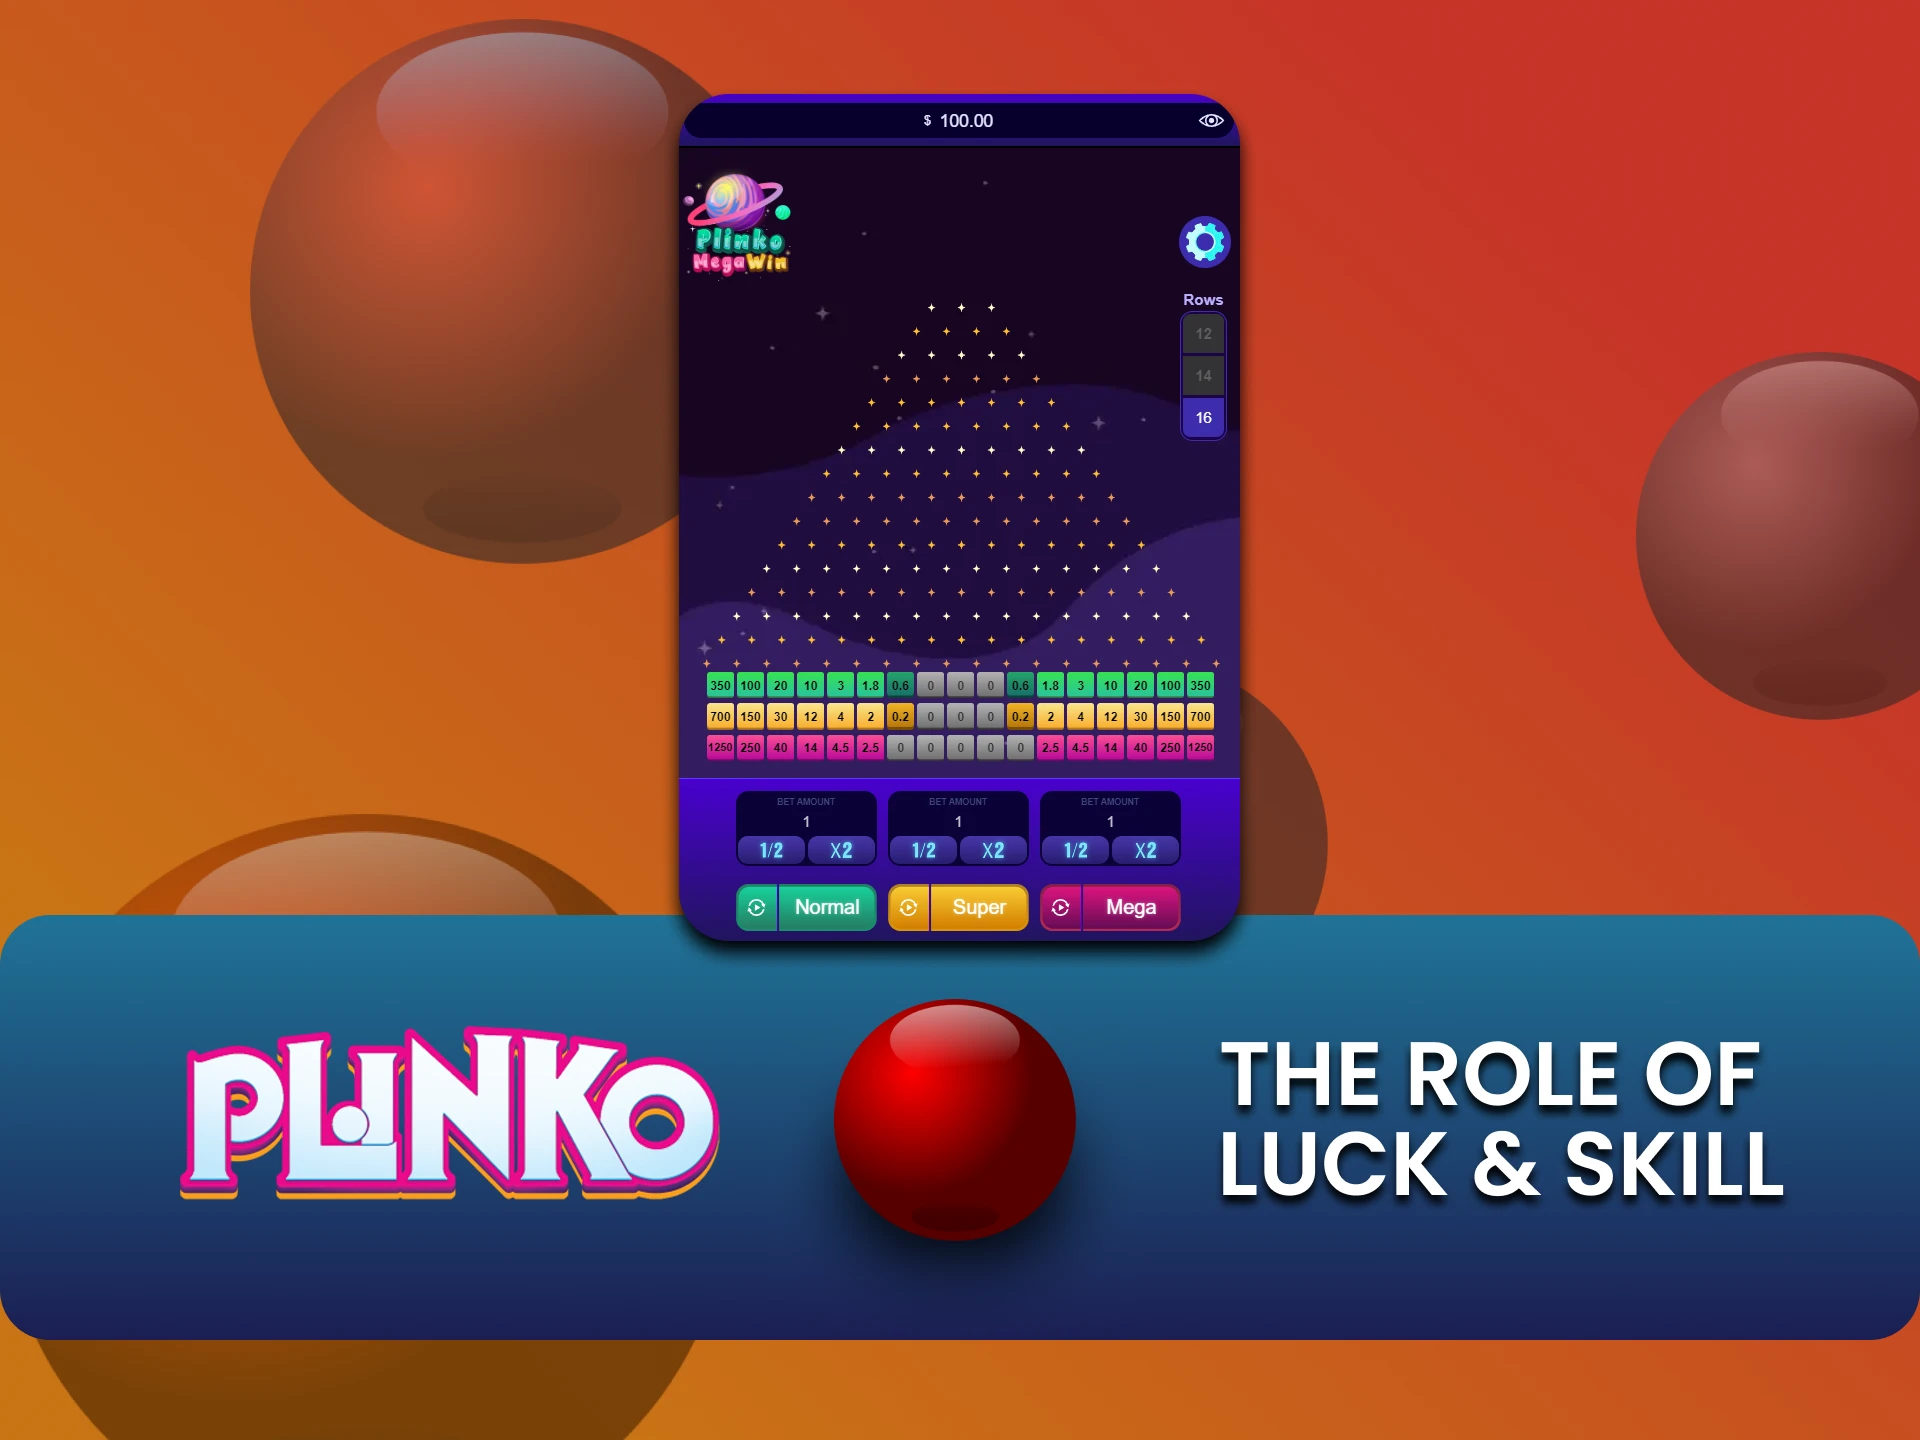 Find out what determines victory in the Plinko game.